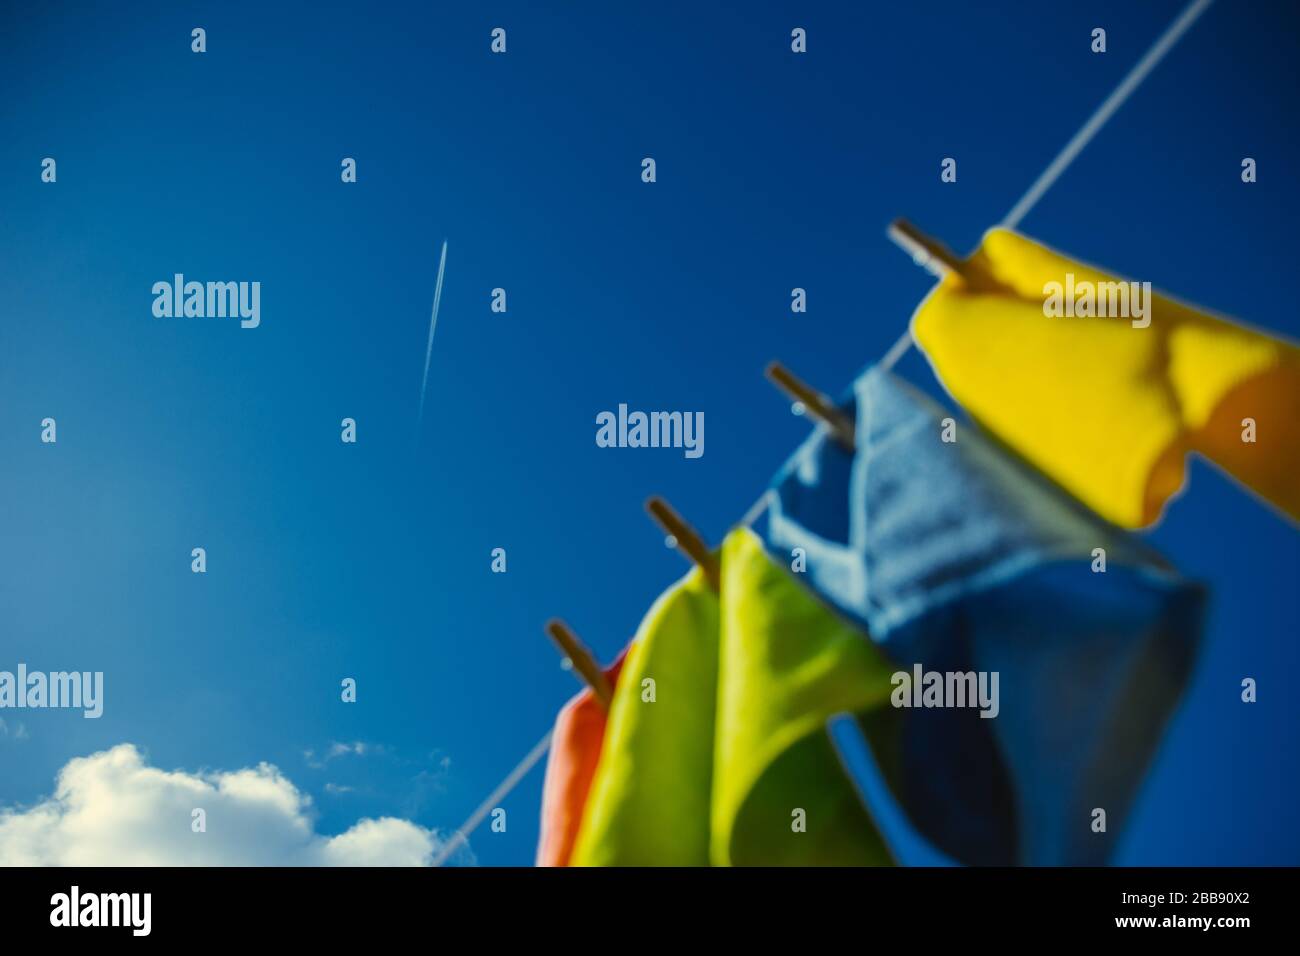 Blue skies with colourful laundry hanging Stock Photo